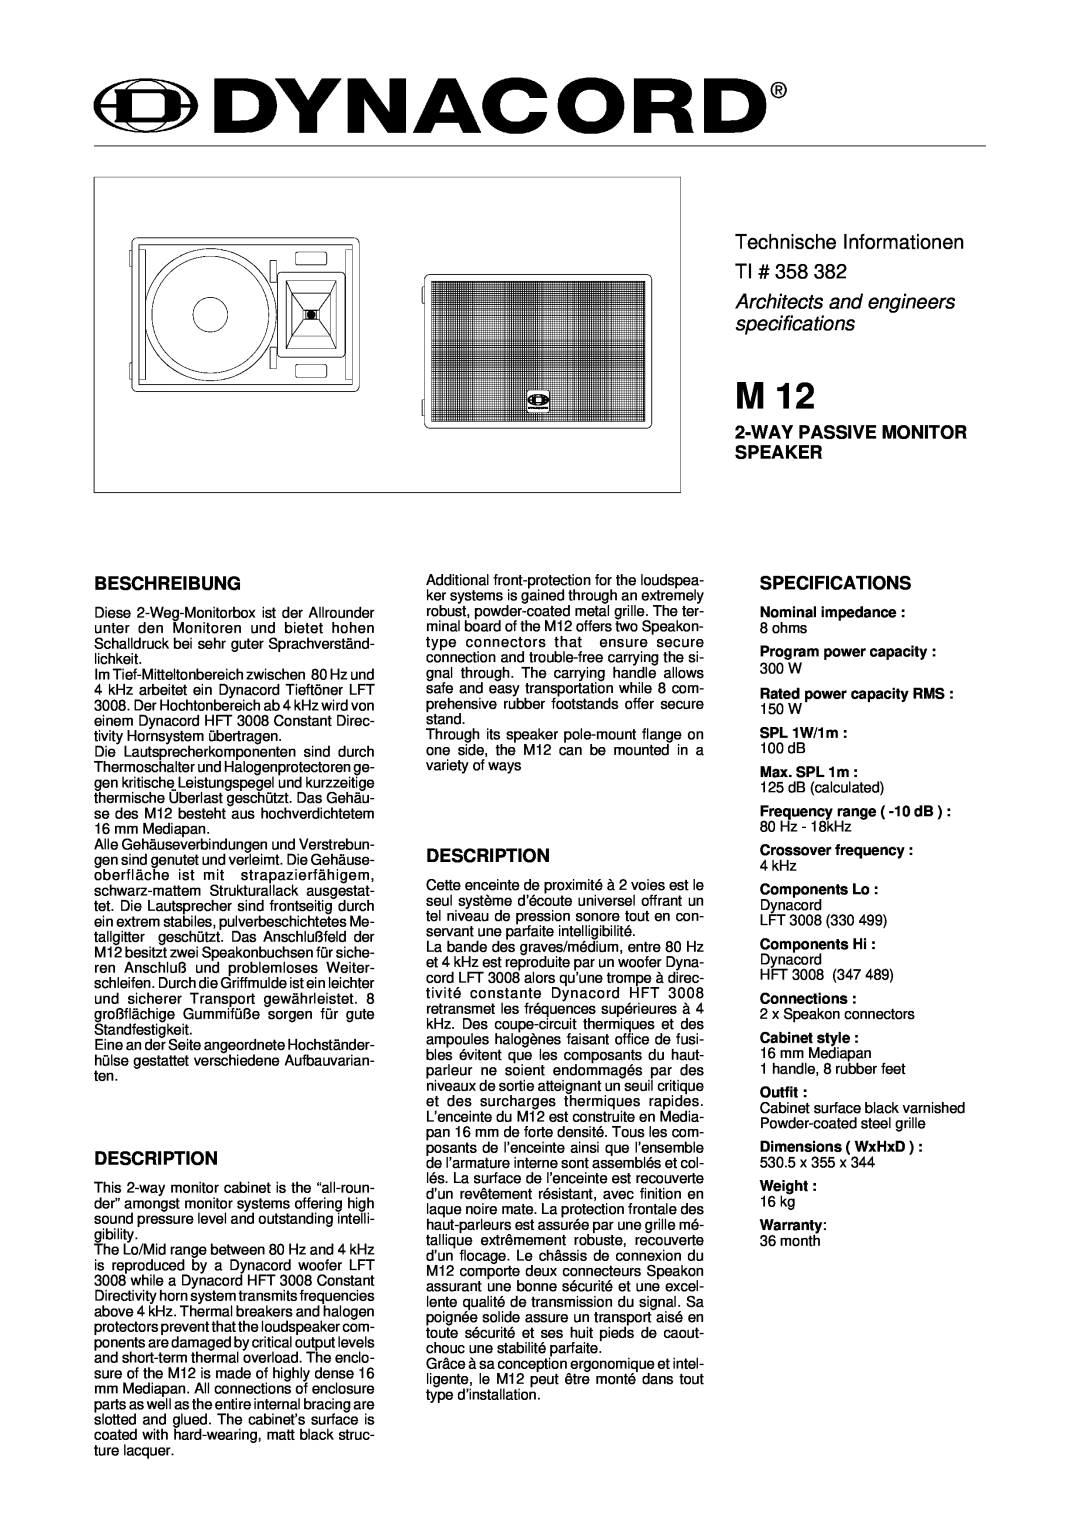 Dynacord M 12 specifications Technische Informationen TI # 358, Architects and engineers specifications, Beschreibung 